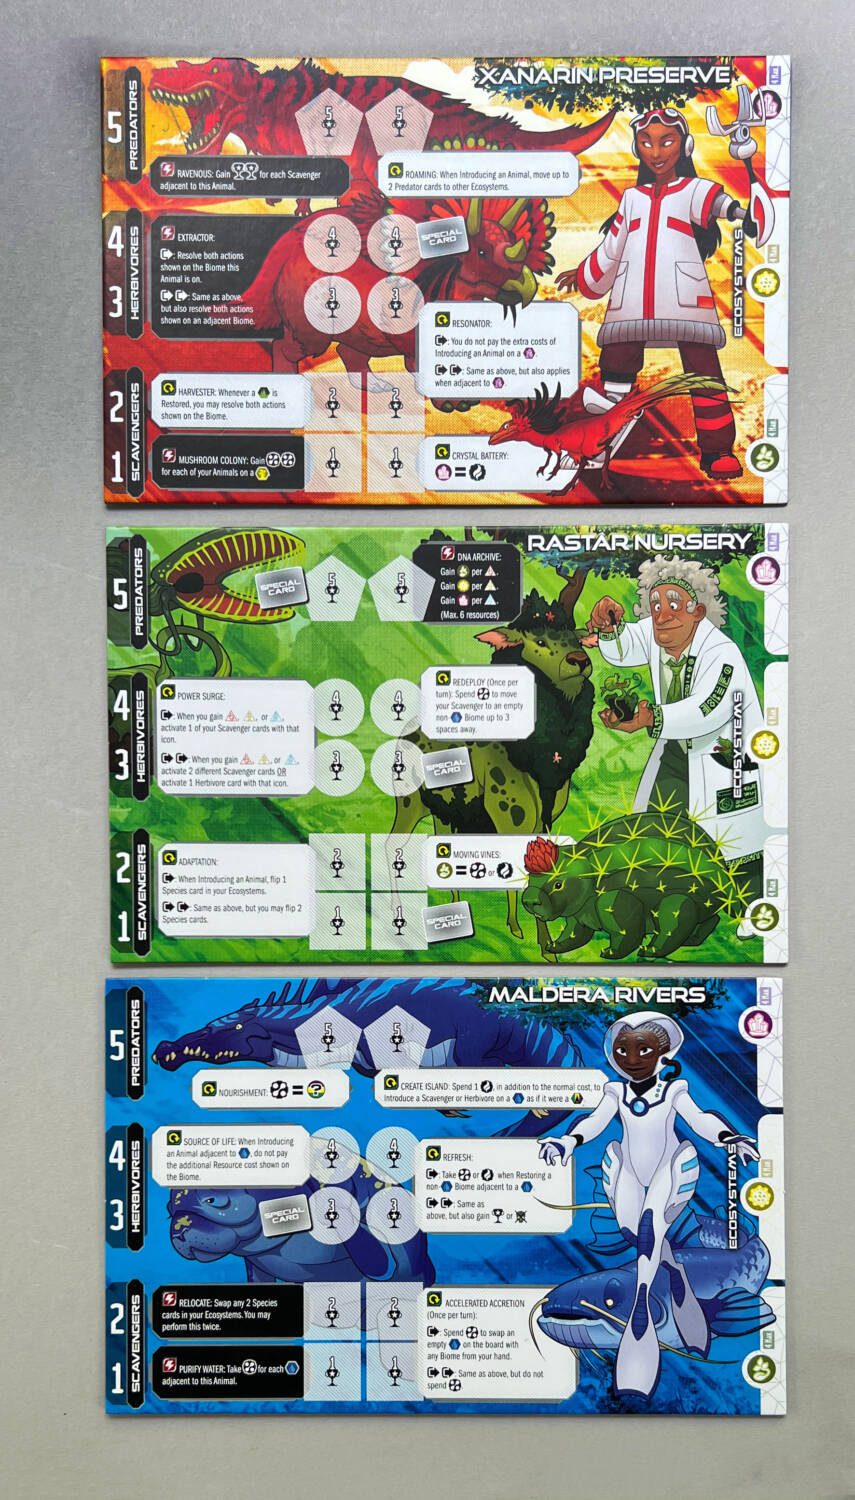 Examples of three other colorful player boards